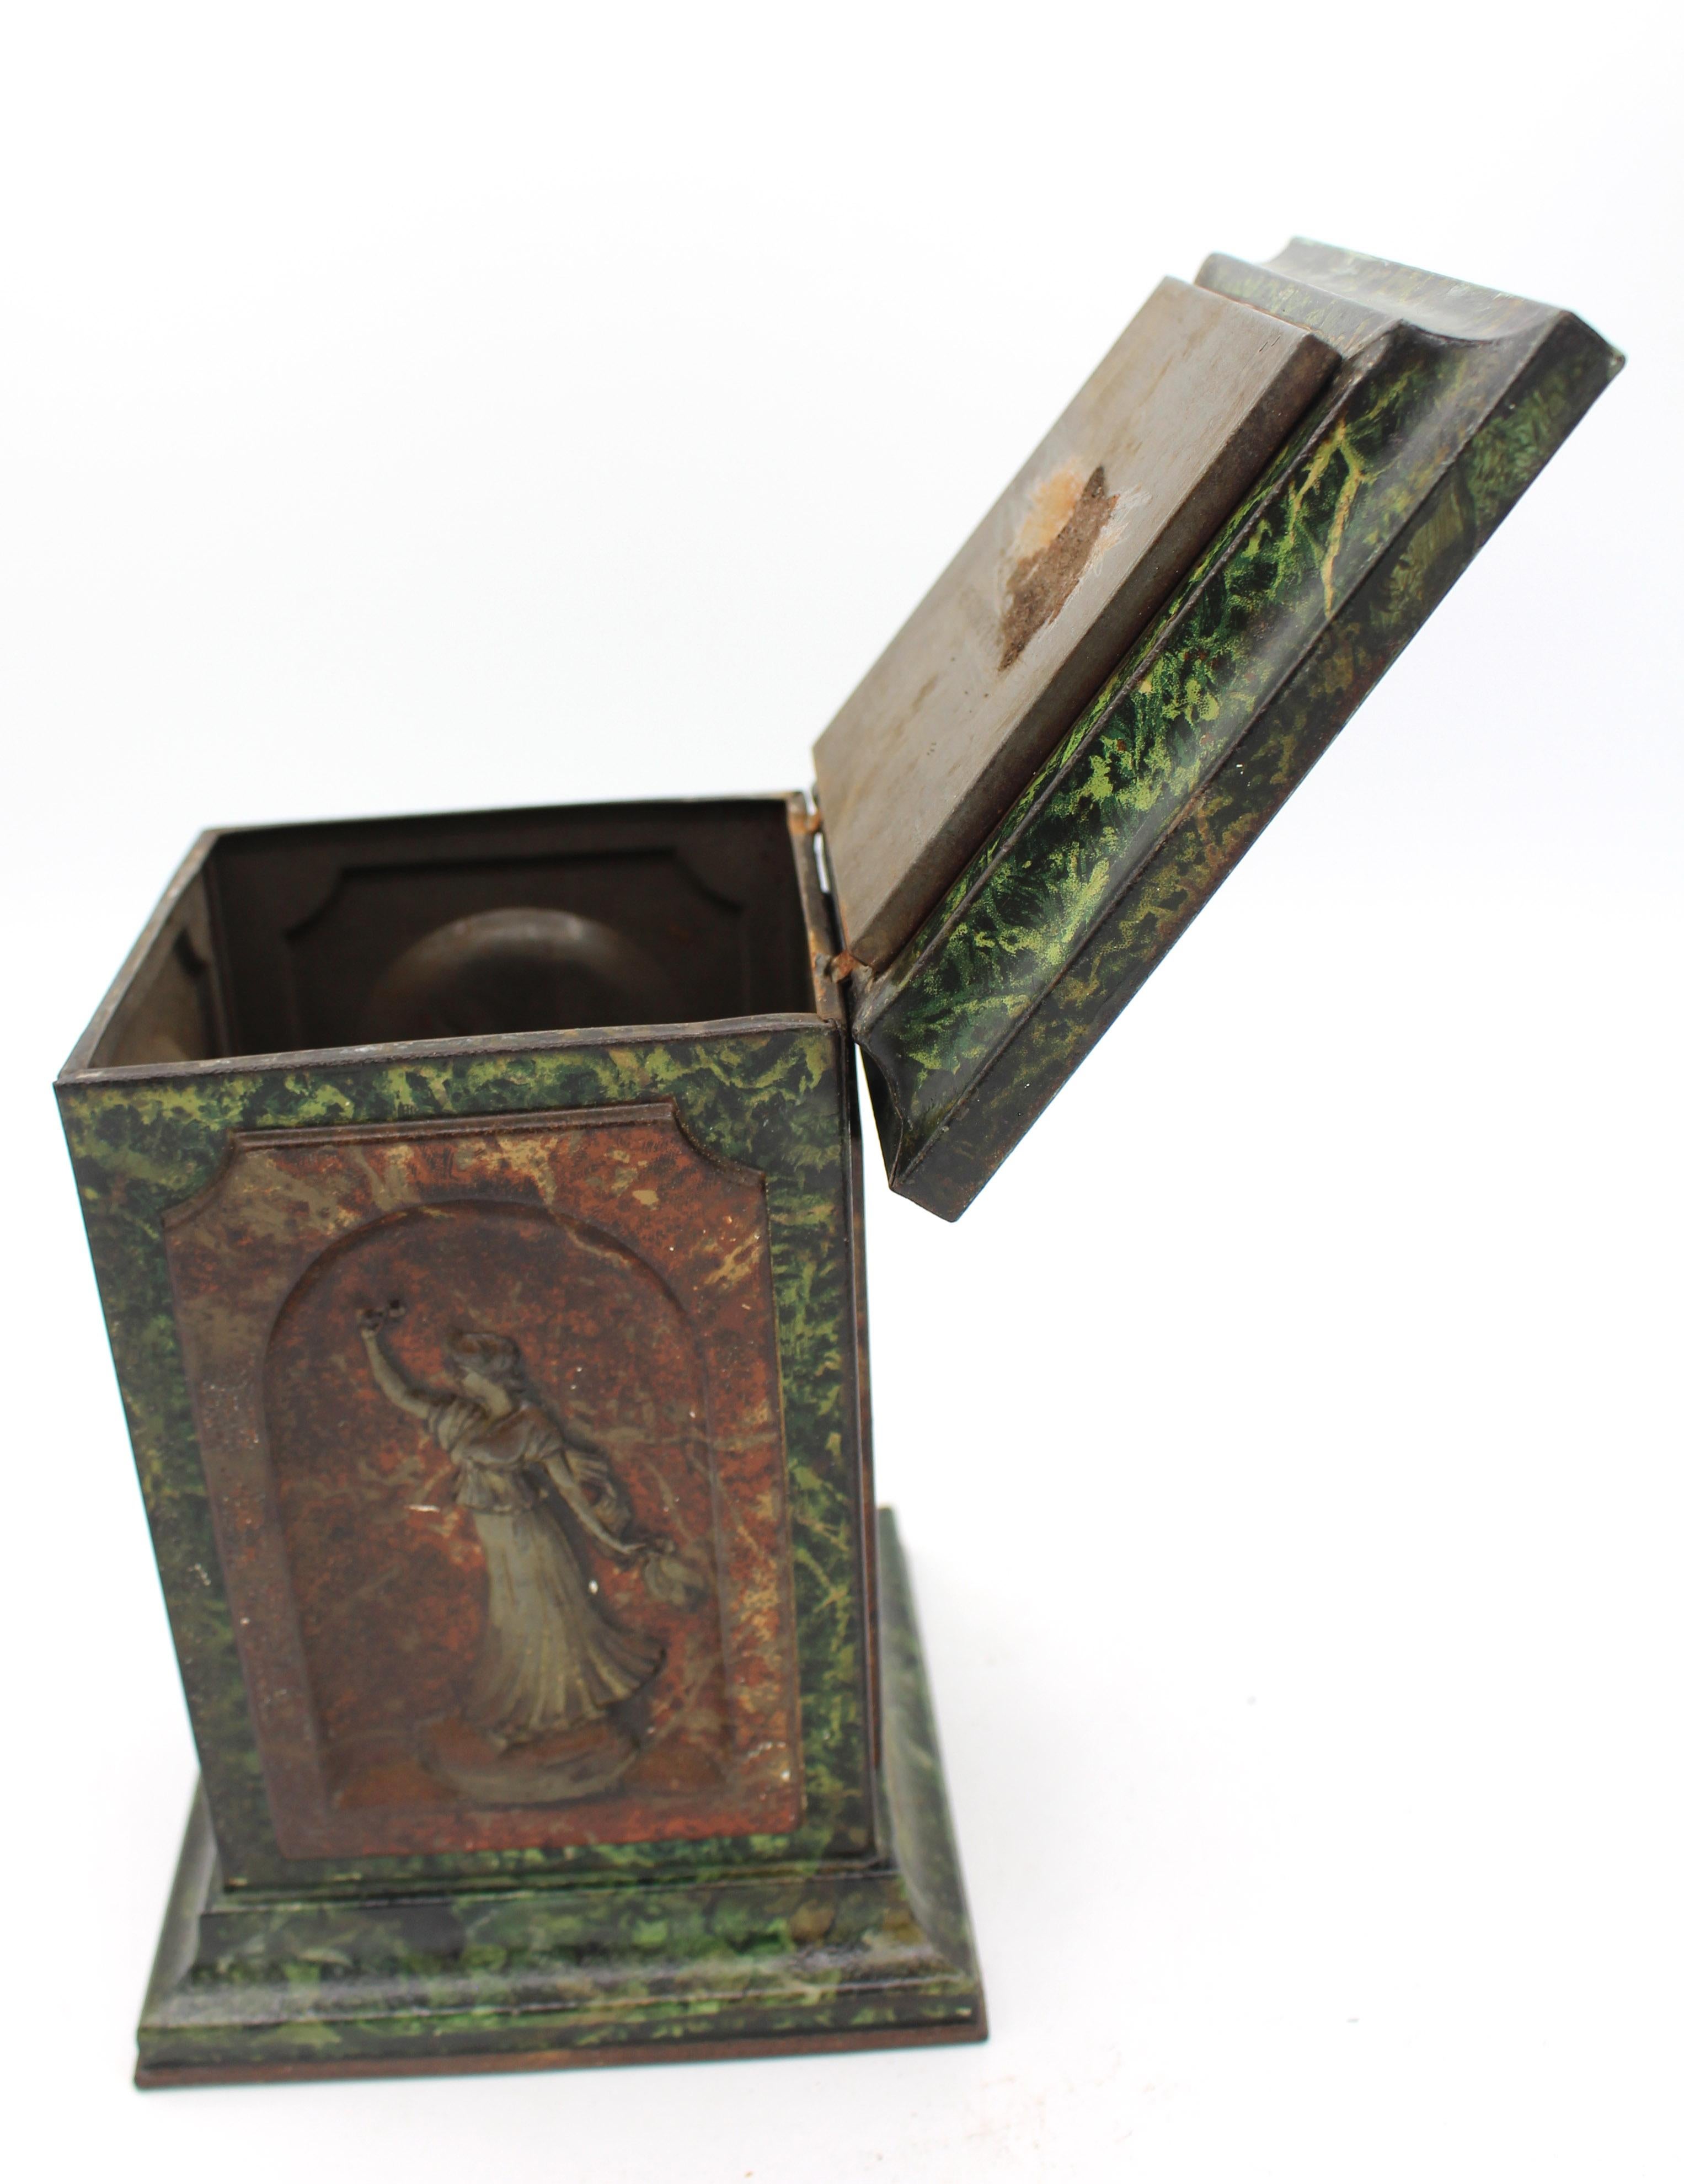 Pair of Huntley & Palmers Sculpture Pedestal Form Biscuit Tin Boxes, circa 1909 For Sale 1